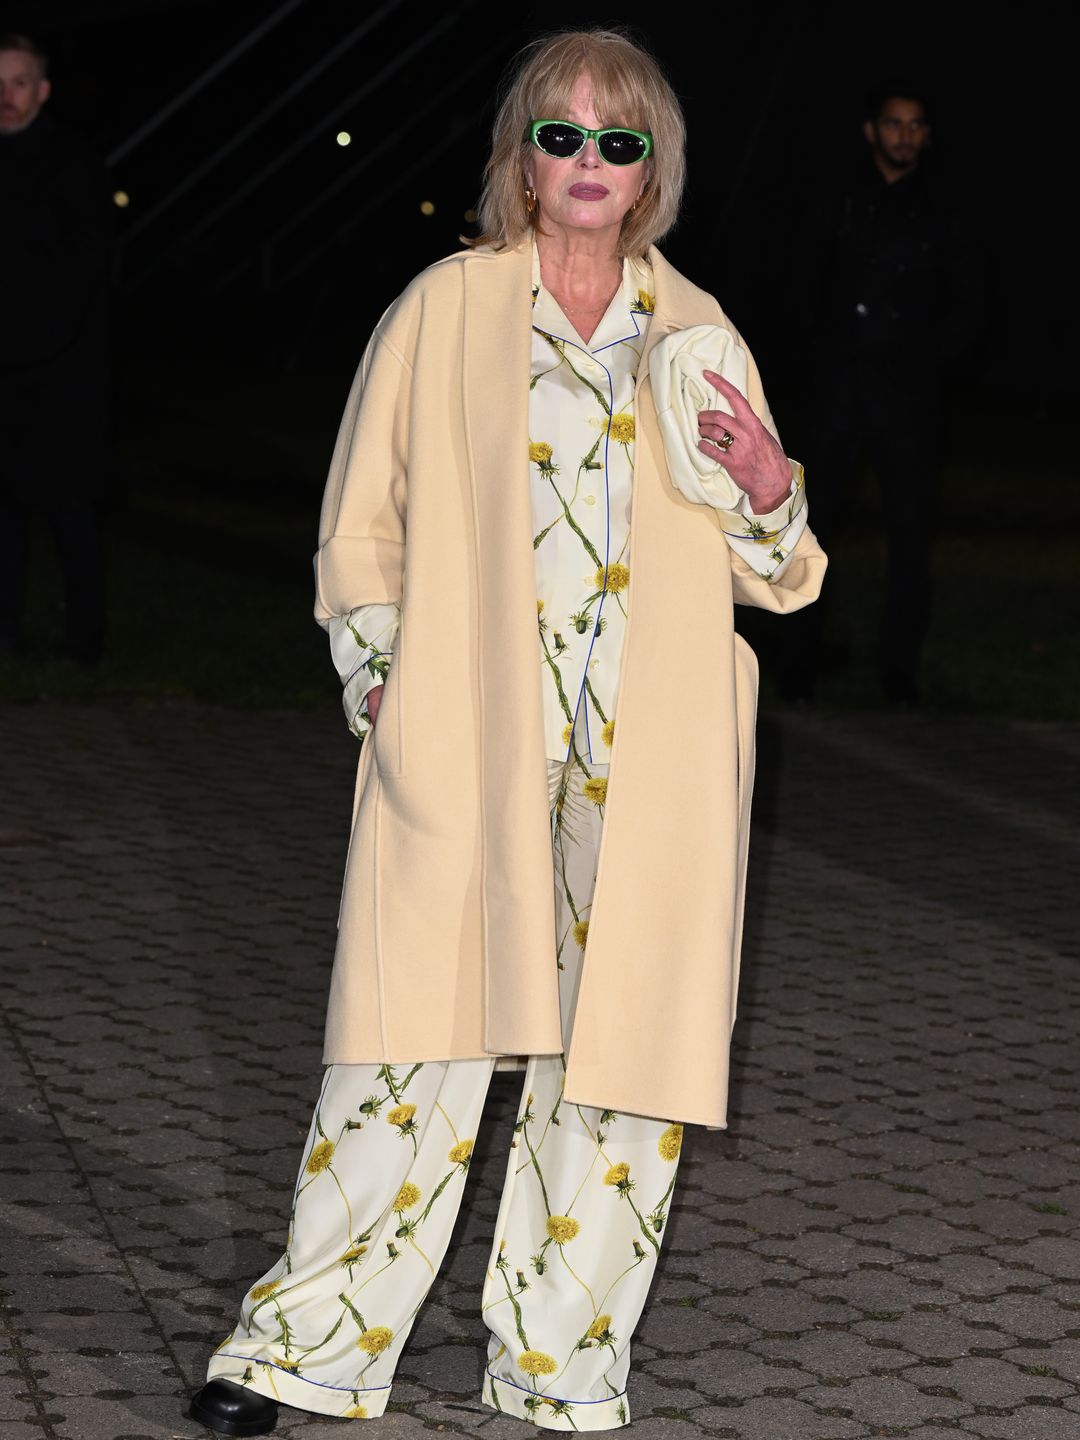 Joanna Lumley kept things casually chic at the Burberry show, donning a silk pyjama set, cream-coloured over coat and bright green framed sunglasses.